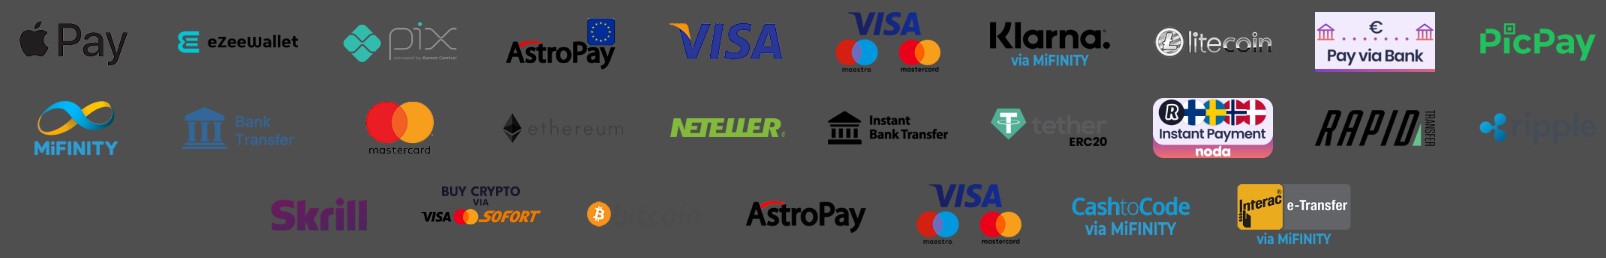 spinpirate payment methods